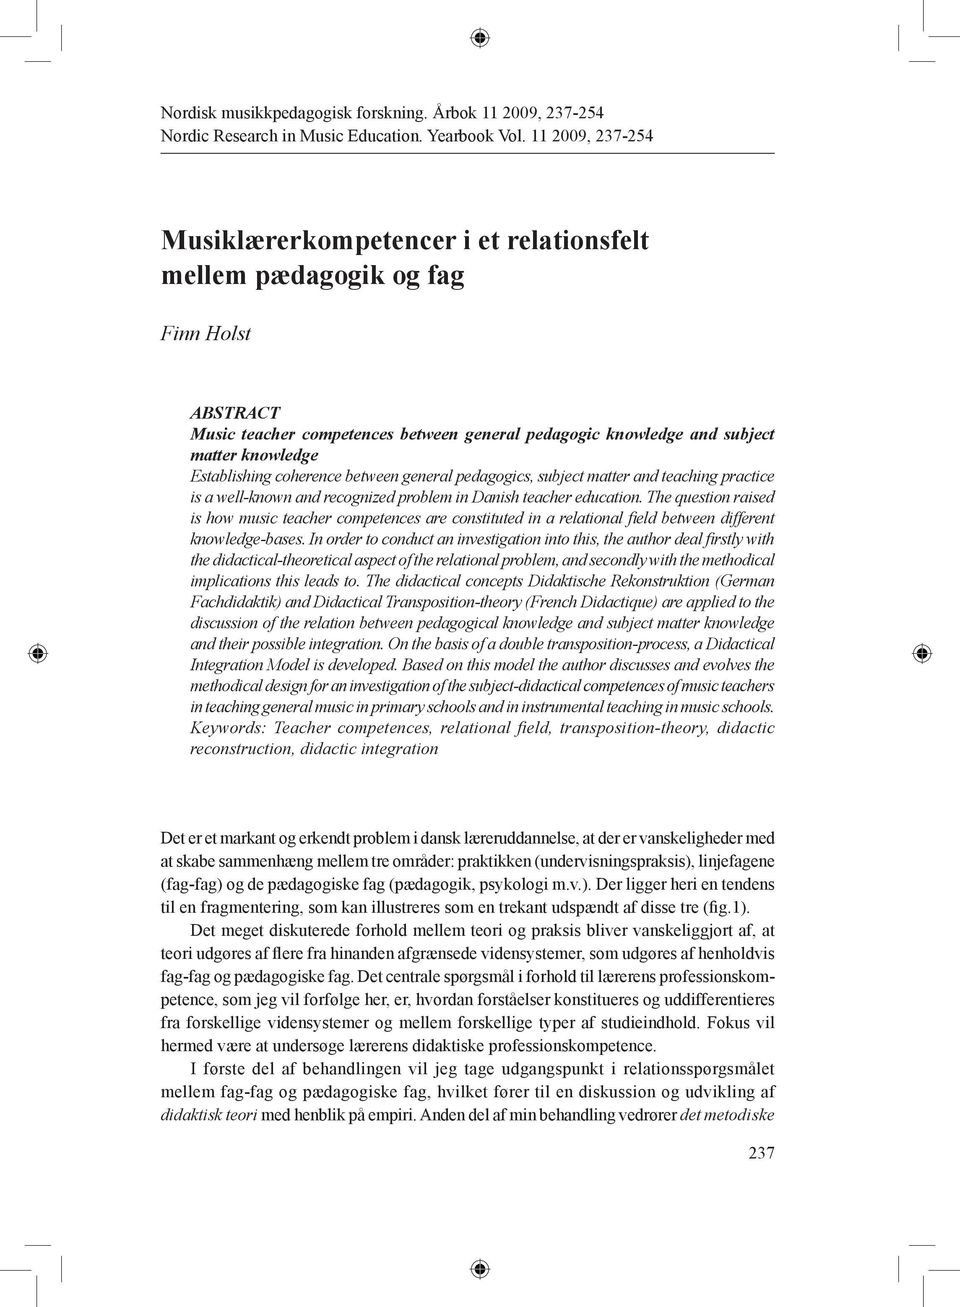 Establishing coherence between general pedagogics, subject matter and teaching practice is a well-known and recognized problem in Danish teacher education.